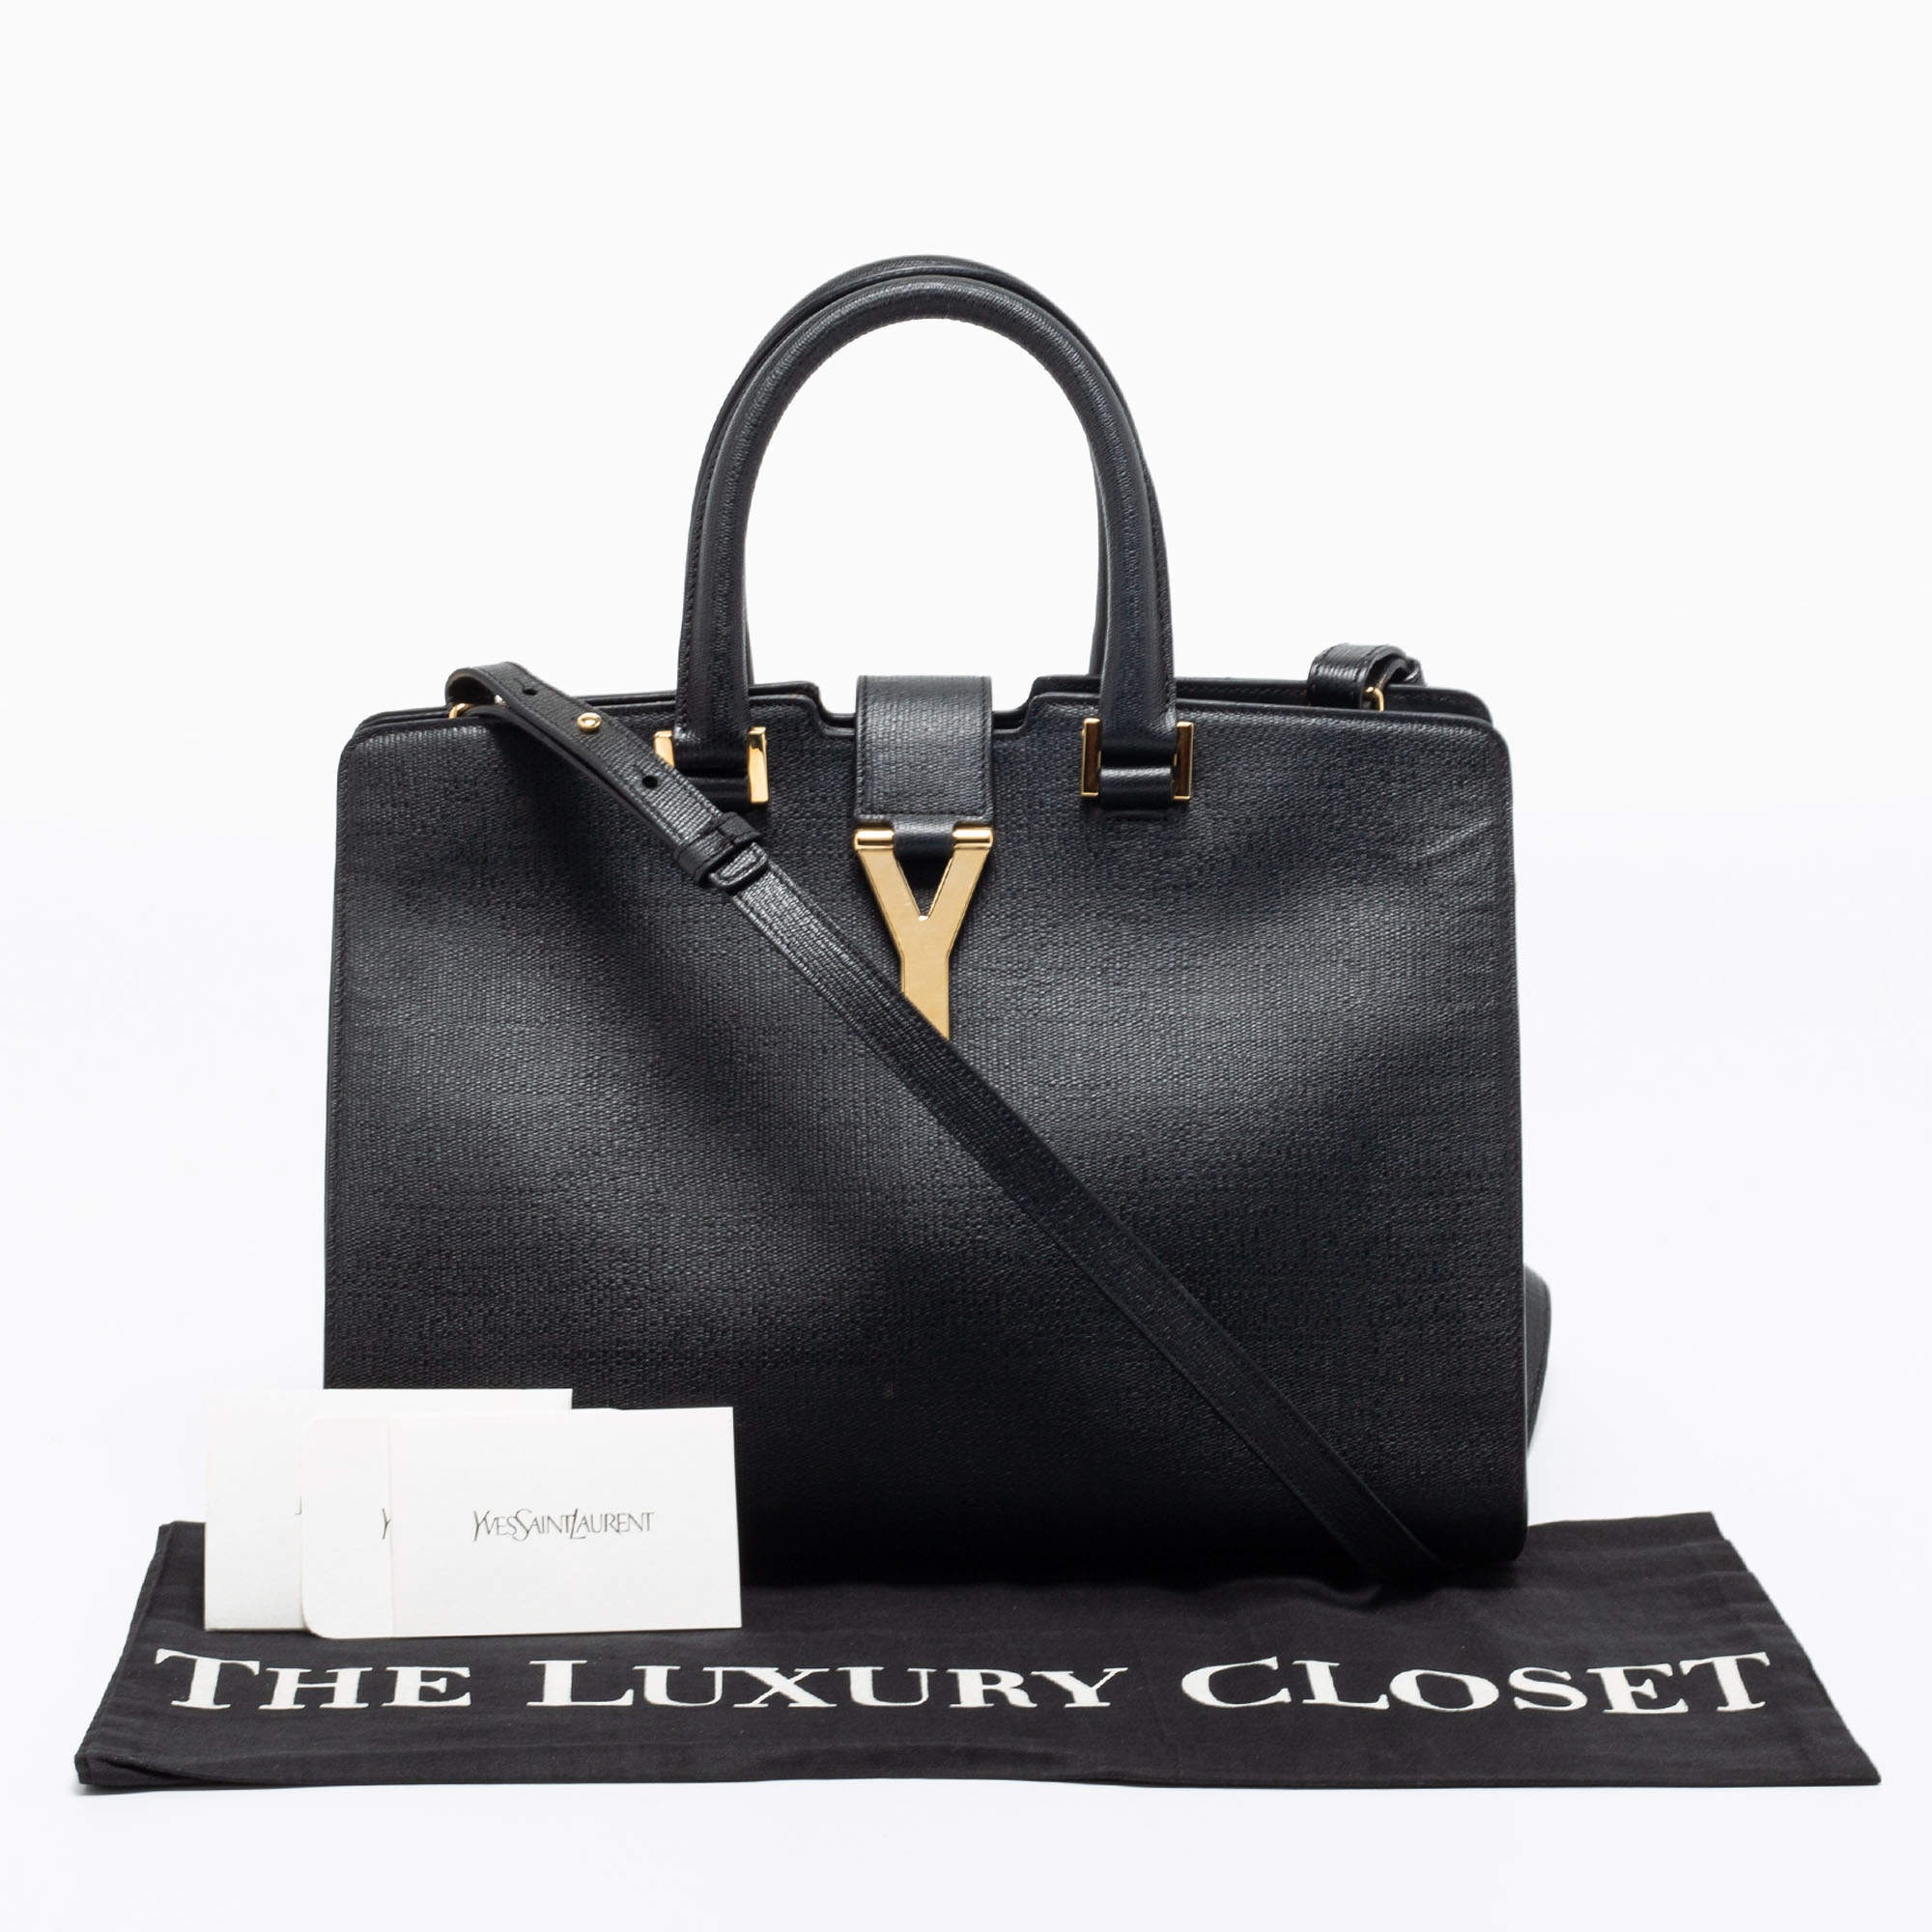 Yves Saint Laurent Black Textured Leather Small Cabas Chyc Tote